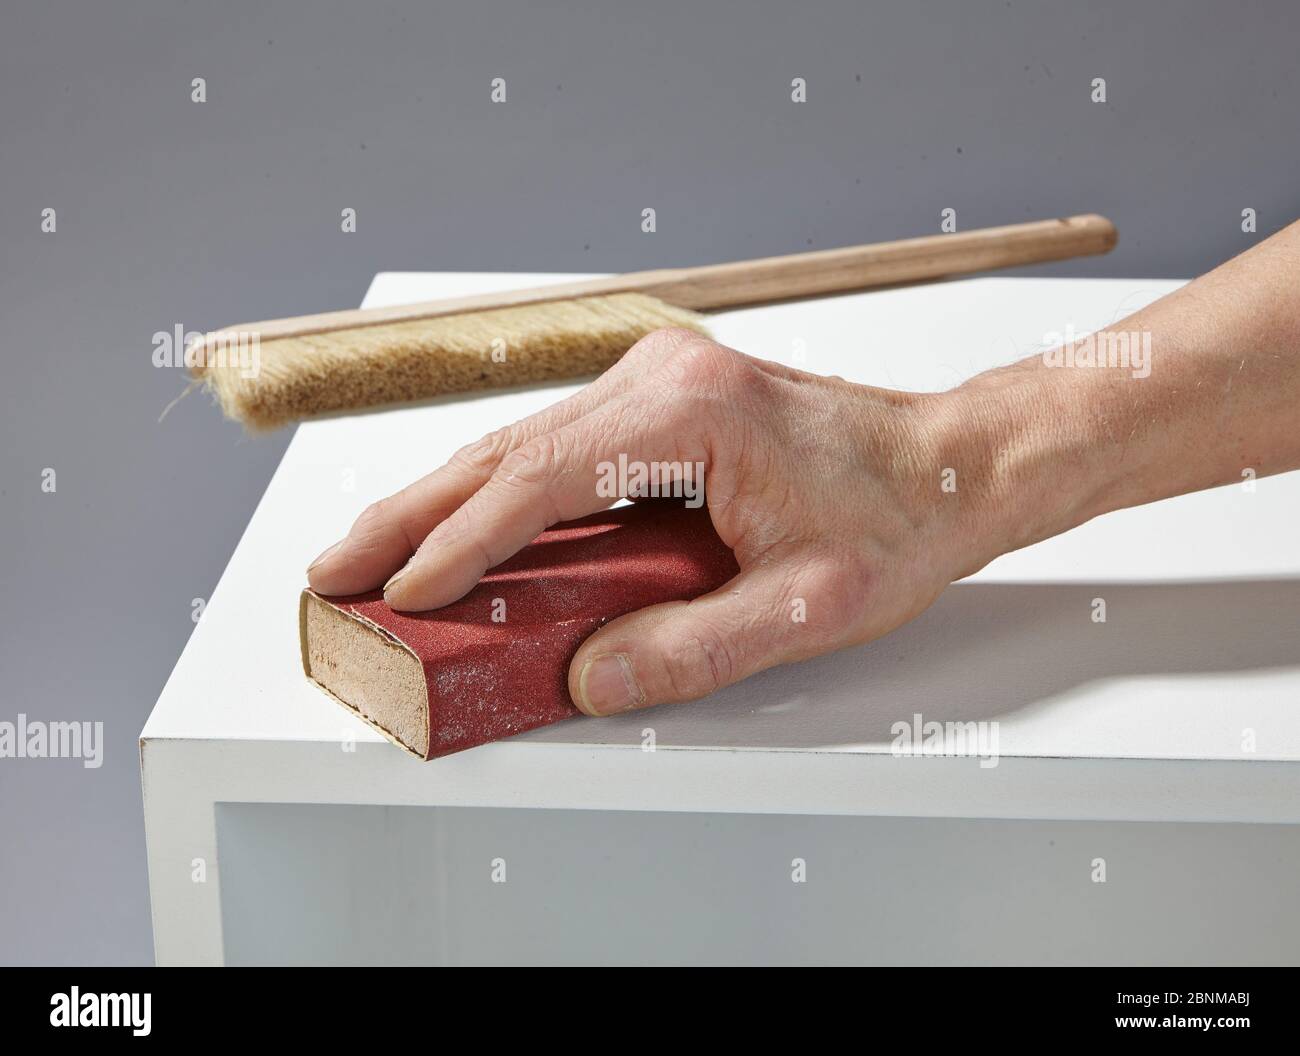 Construction of a shelf made of wood, Euro pallet, solid wood, MDF board; Do-it-yourself production, step-by-step, step 13b intermediate sanding with sanding block, then dedusting again Stock Photo